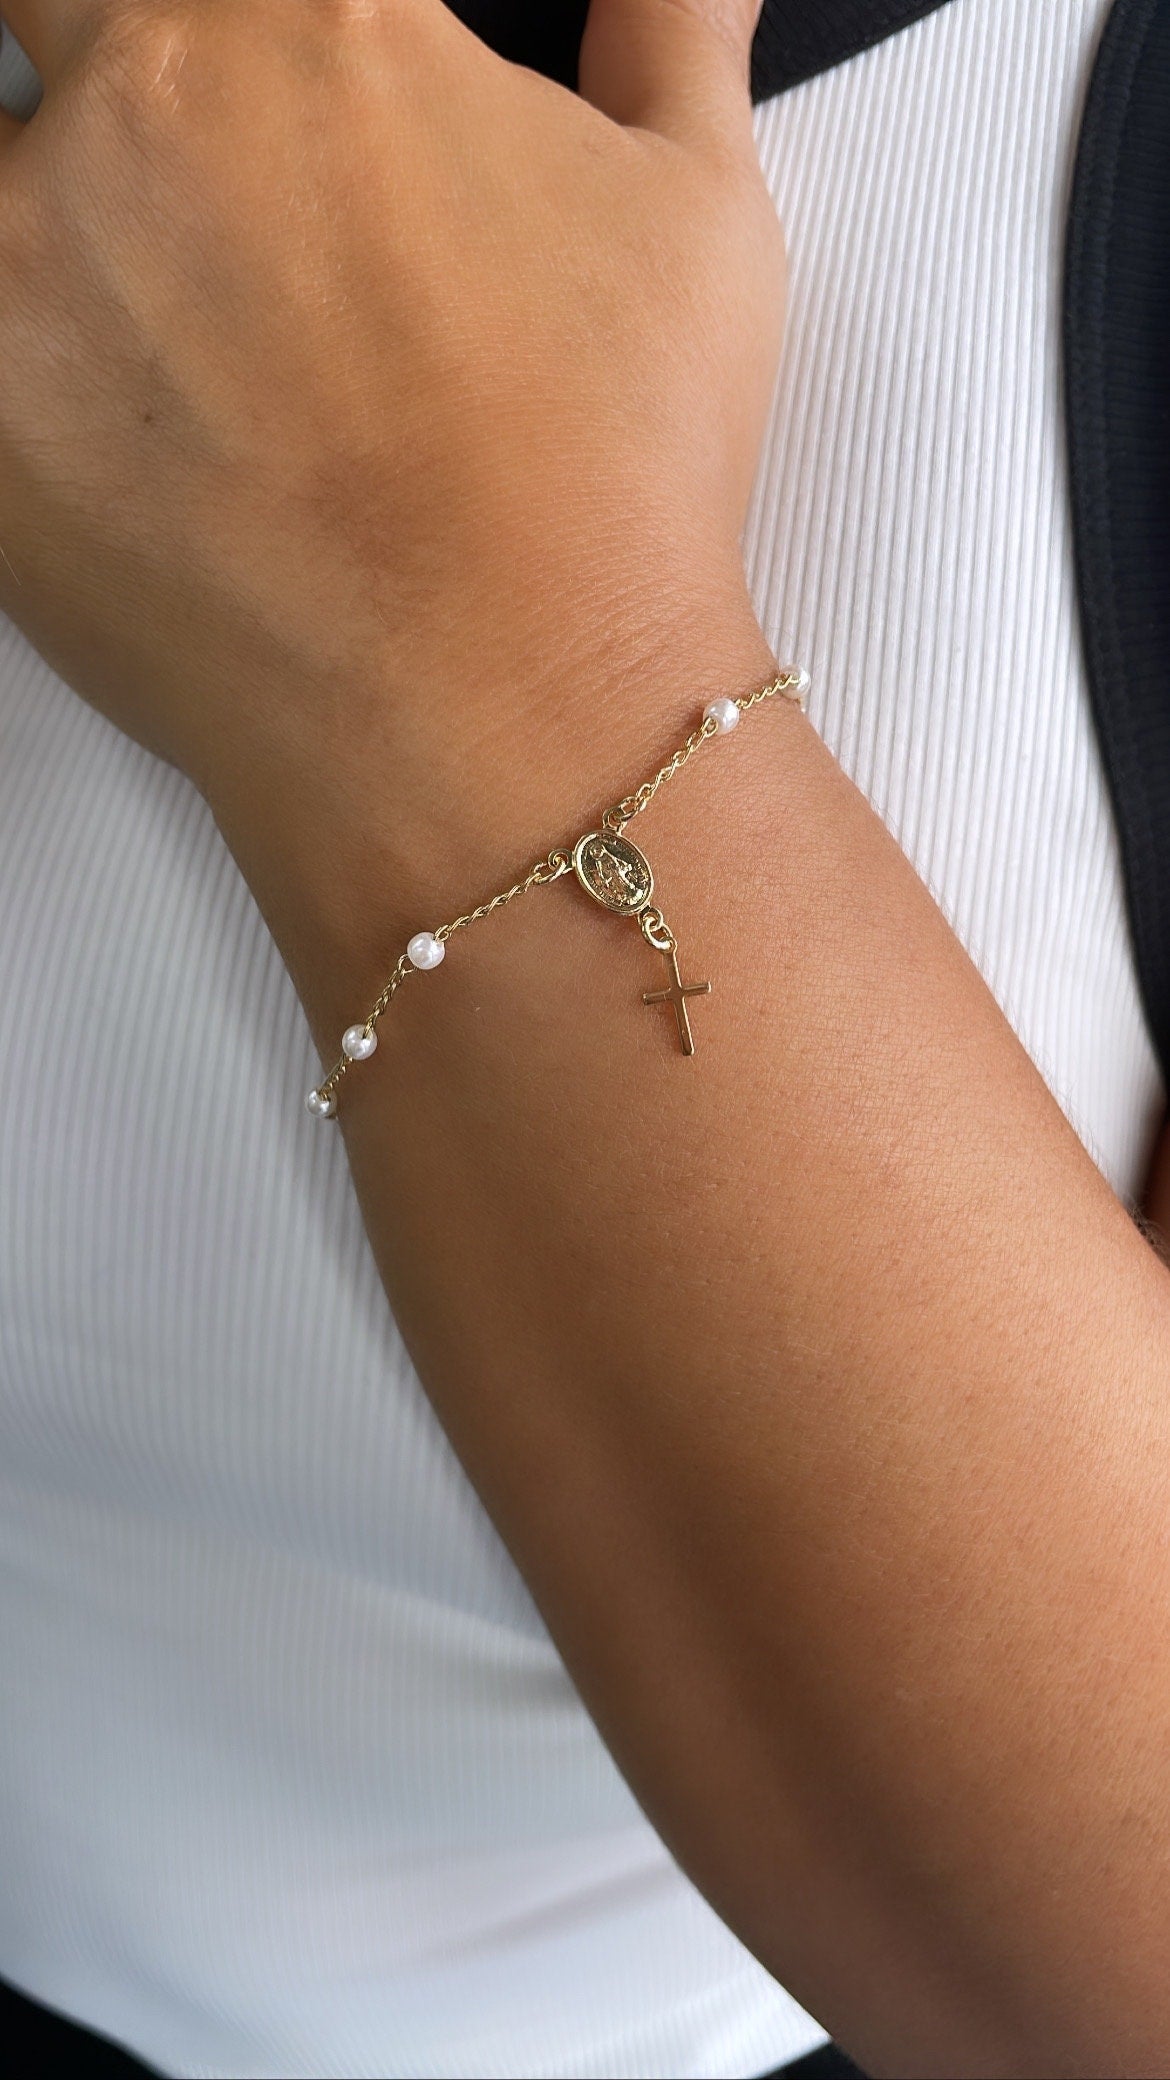 18k Dainty Gold Filled Beaded Pearl Satellite Rosary Bracelet with Virgin Mary and Crucifix Charm